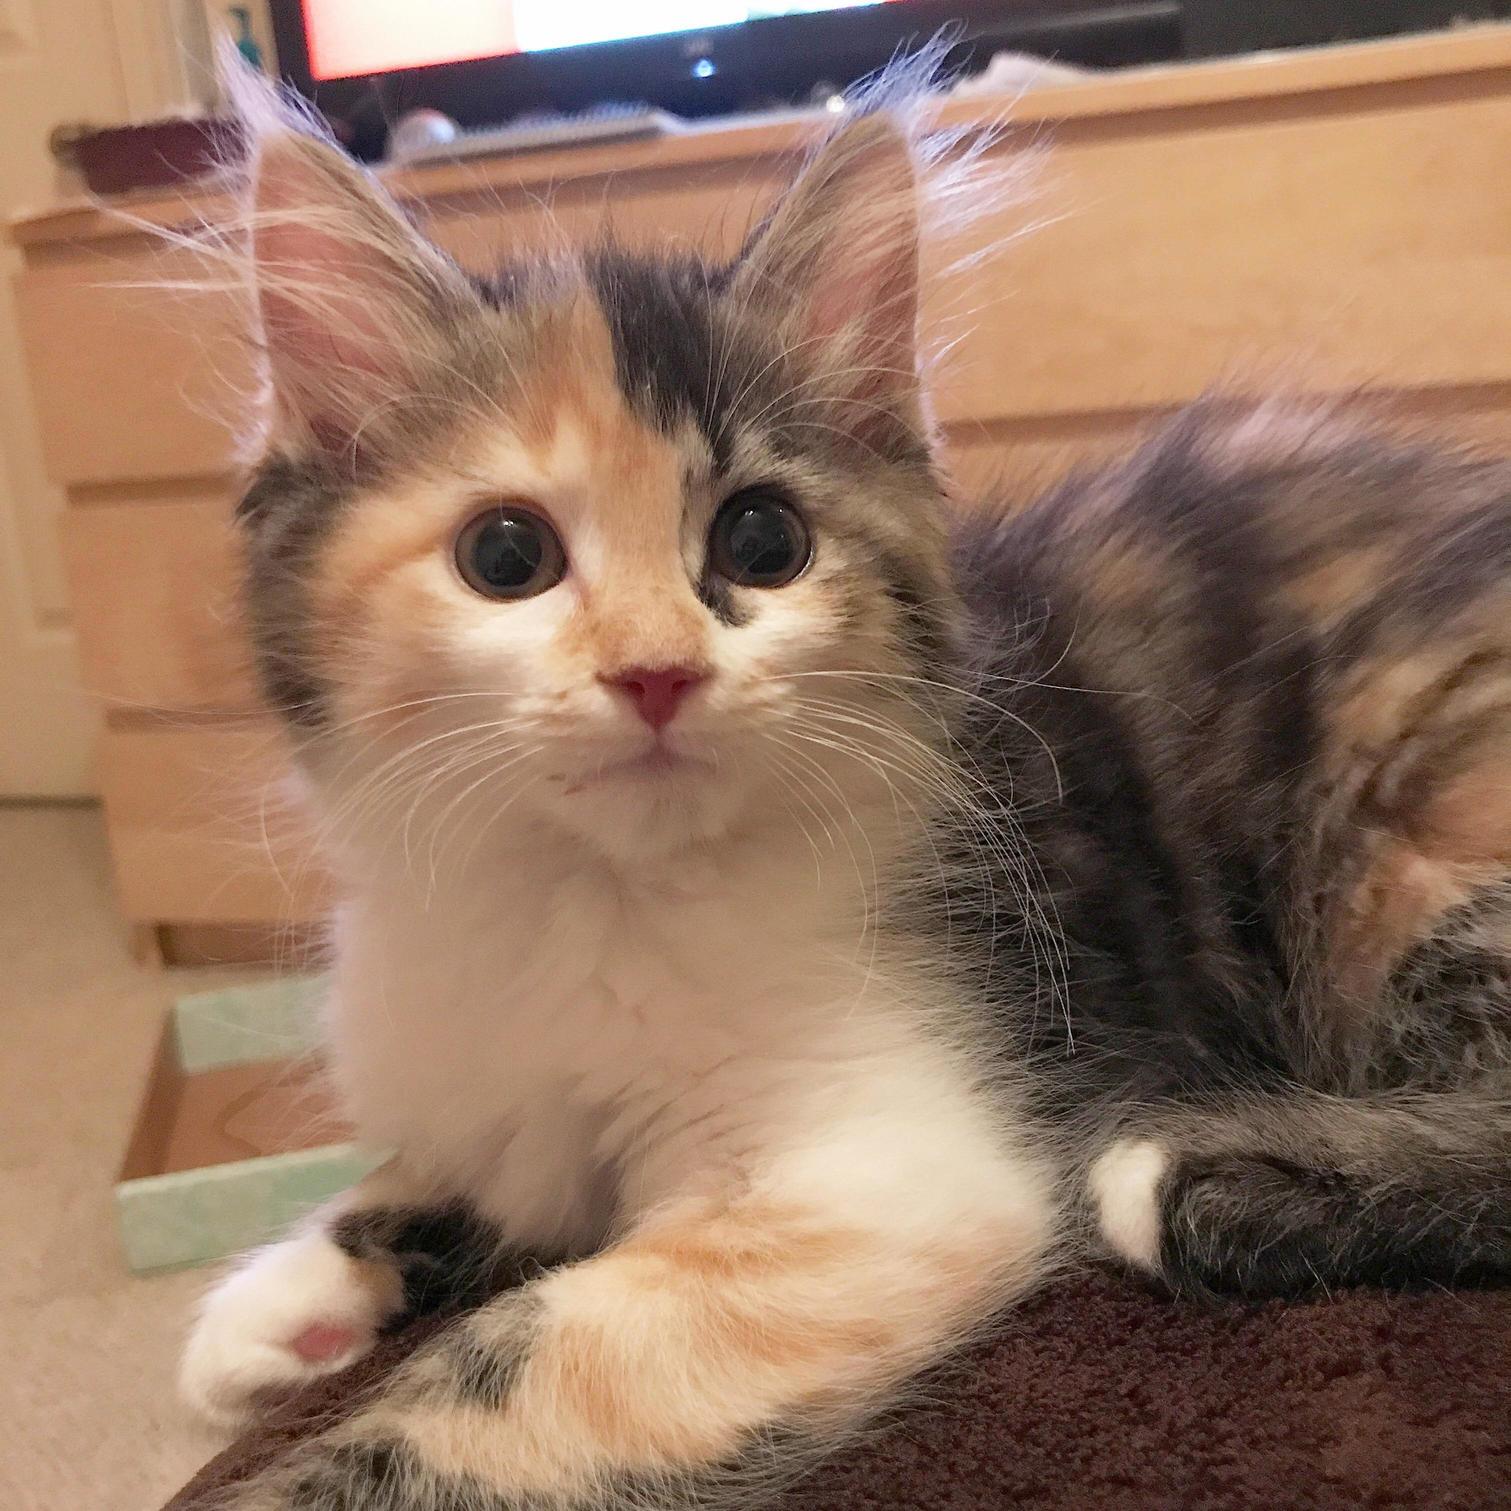 My name is chloe i only like to sleep beside your face my purr will keep you up all night and my new family is already wrapped around my little finger.